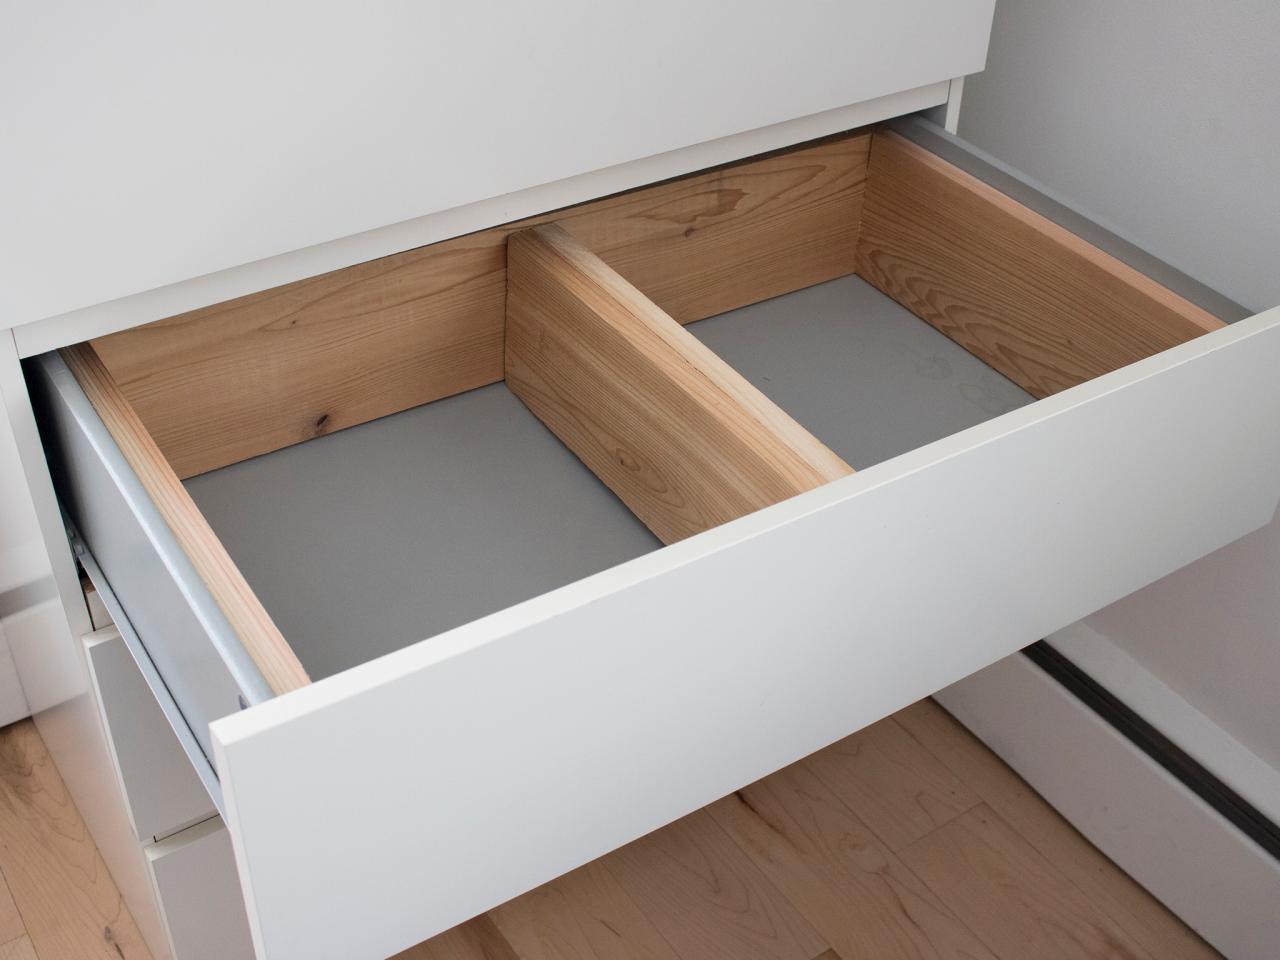 How To Build Cedar Drawer Liners How Tos Diy